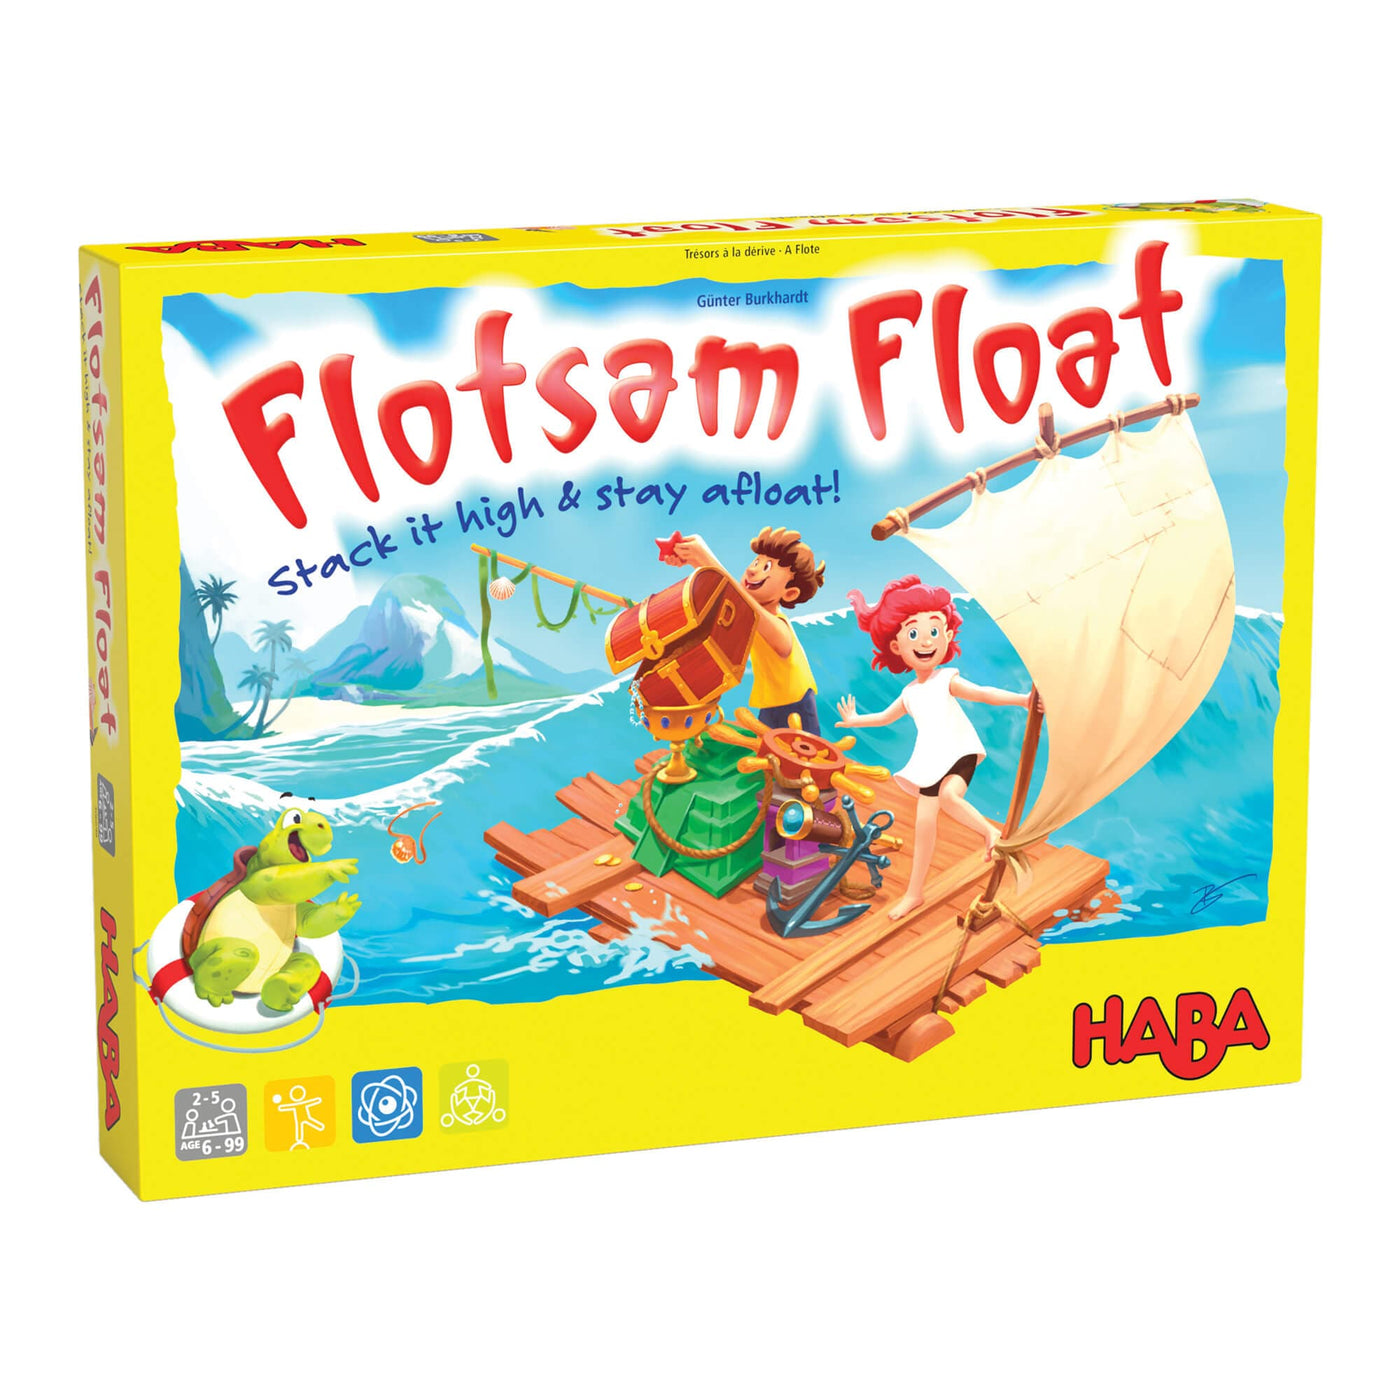 Flotsam Float - Stack it high & stay afloat! Game by HABA